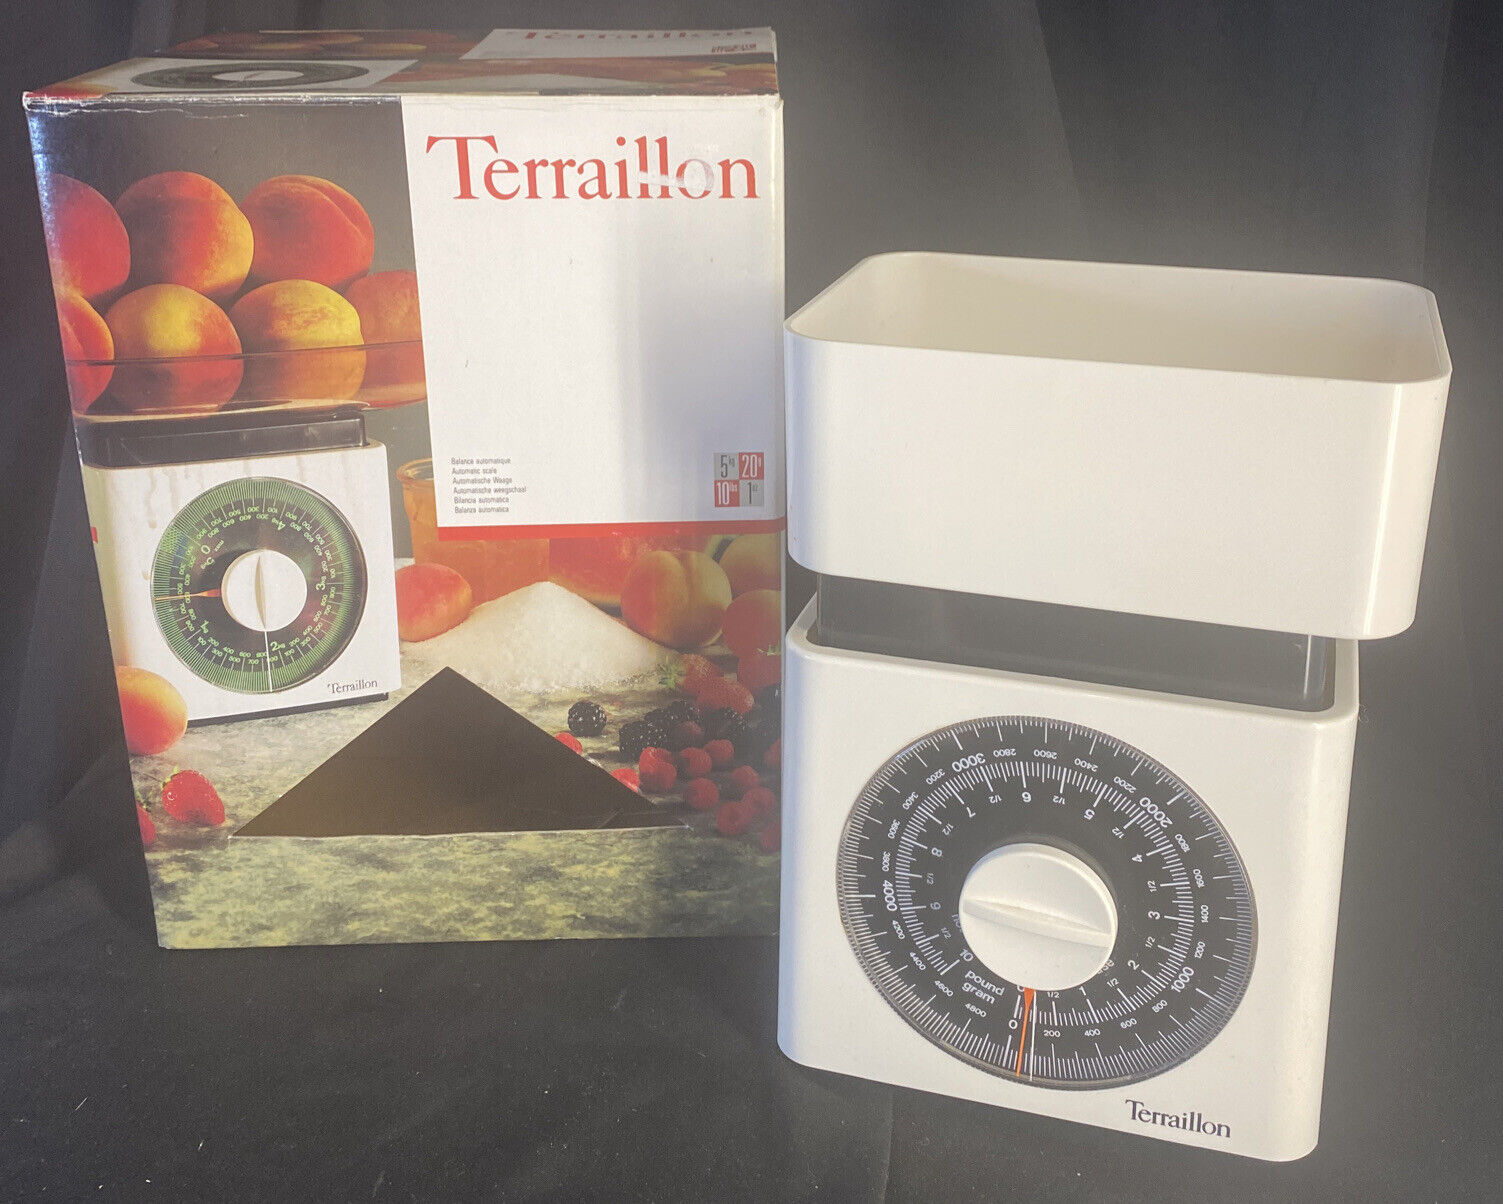  Kitchen Scale Terraillon 5kg/10lbs, with Tray and original box